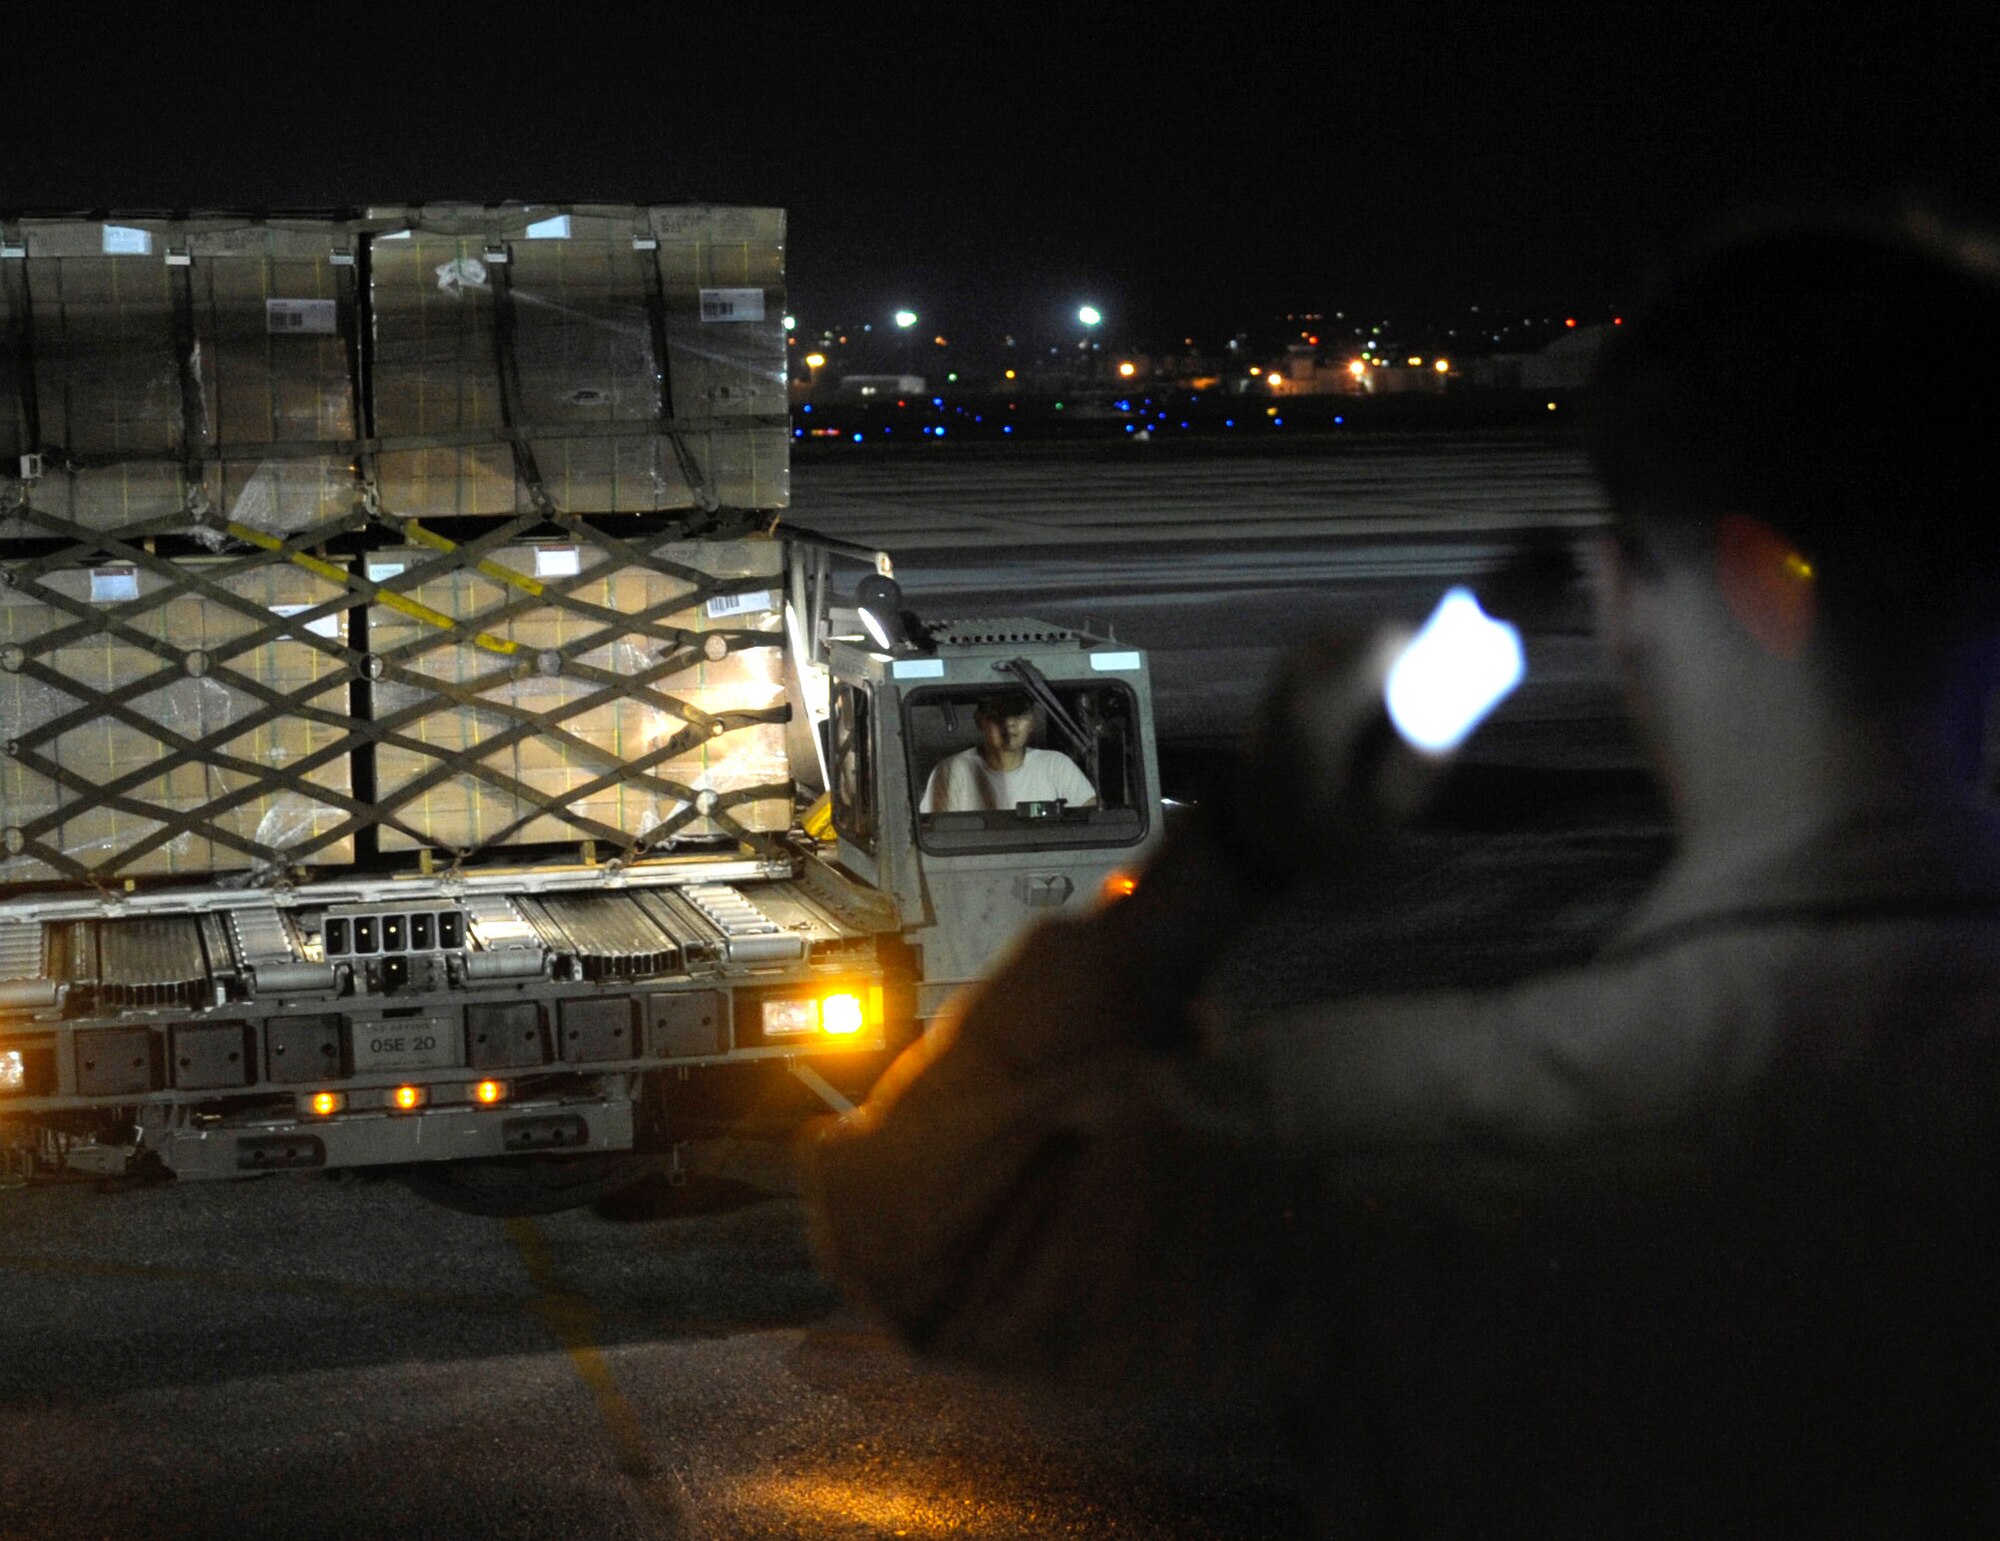 Air Force and Marine Corps personnel load gear for a U.S. Pacific Command Joint Humanitarian Assistance Survey Team onto a U.S. Marine Corps C-130 Hercules at Kadena Air Base, Japan, April 29, 2015. The survey team is deployed to Nepal to assist earthquake relief efforts. (U.S. Air Force photo/Airman 1st Class Zackary A. Henry)